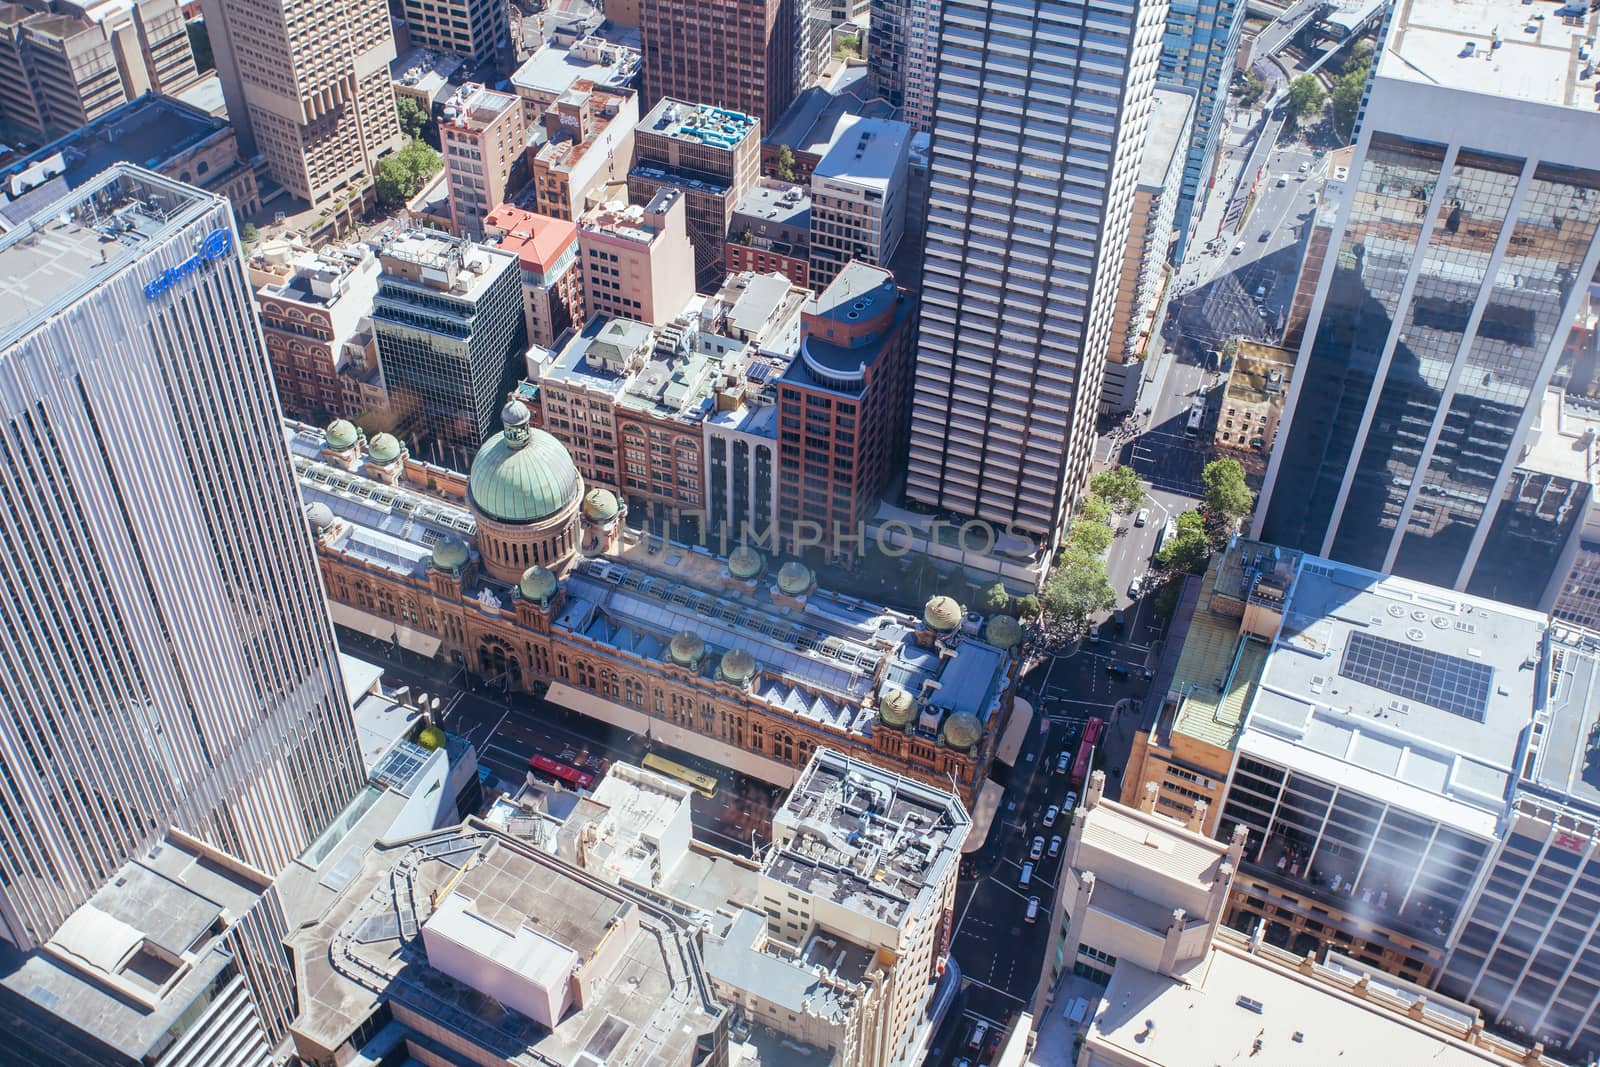 An aerial view of Sydney's buildings and architecture on a clear sunny day in NSW, Australia